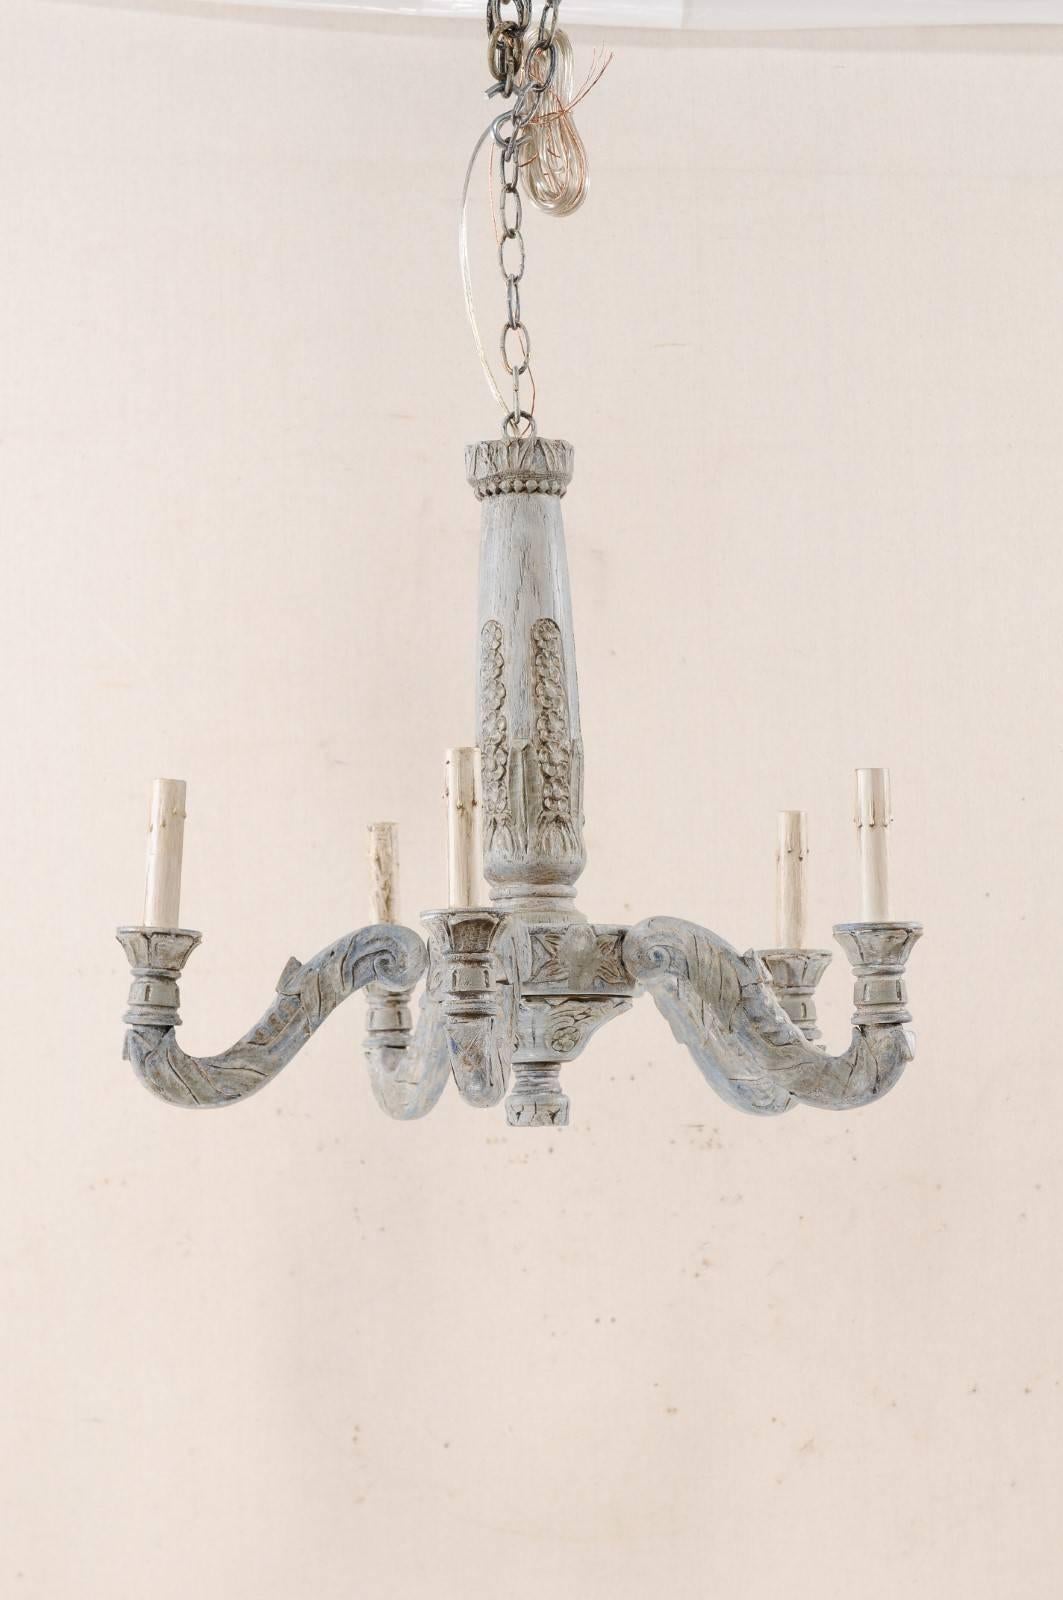 A French mid-20th century carved and painted wood five-light chandelier. This lovely French chandelier from the mid-20th century features a carved central column in delicate flower and foliage motif with five s-scrolled arms emerging outward that